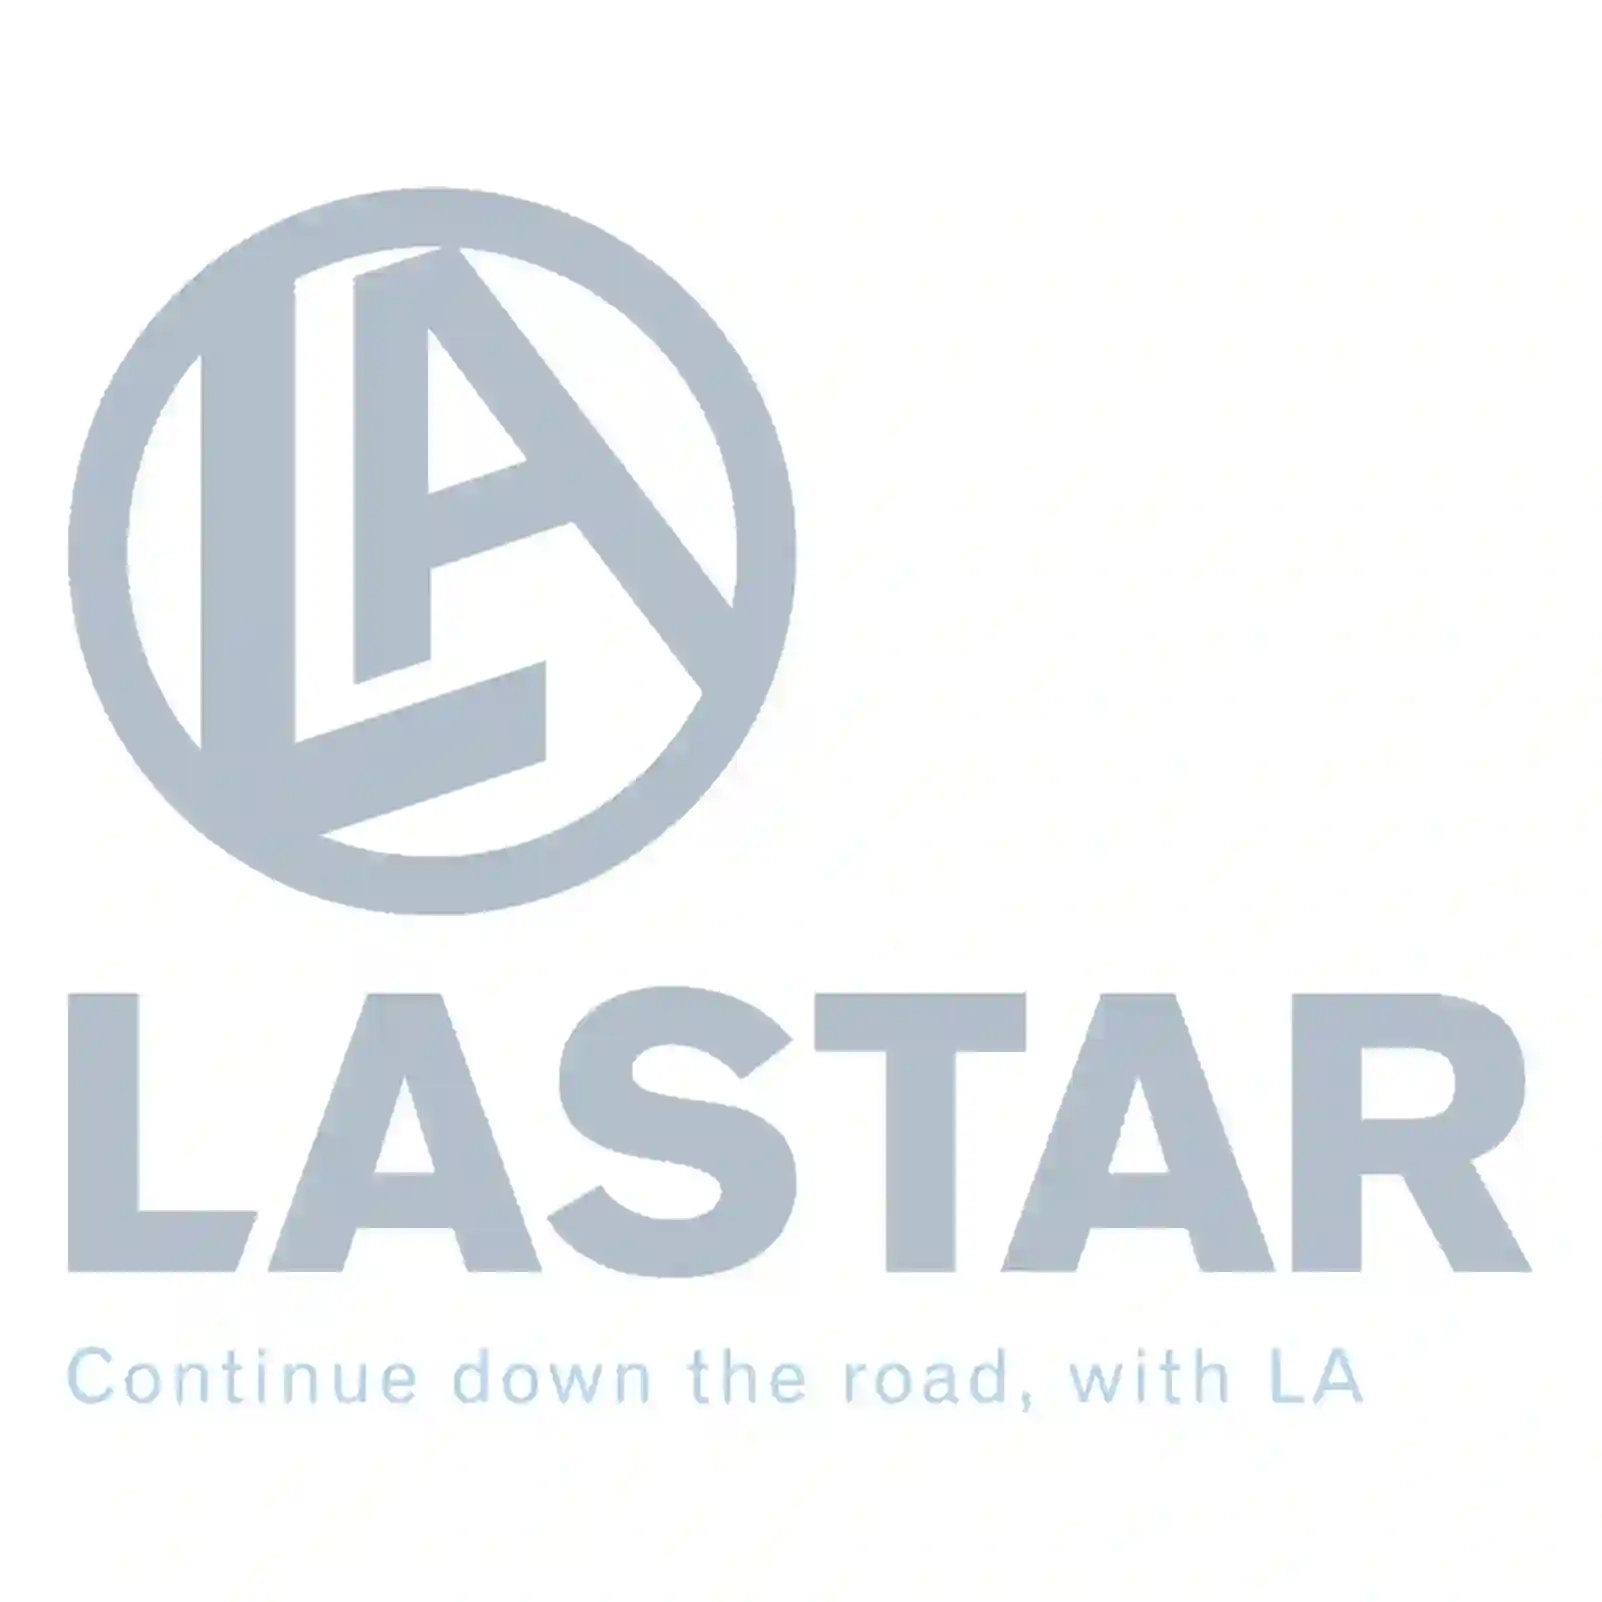  Turn signal lamp, rear || Lastar Spare Part | Truck Spare Parts, Auotomotive Spare Parts